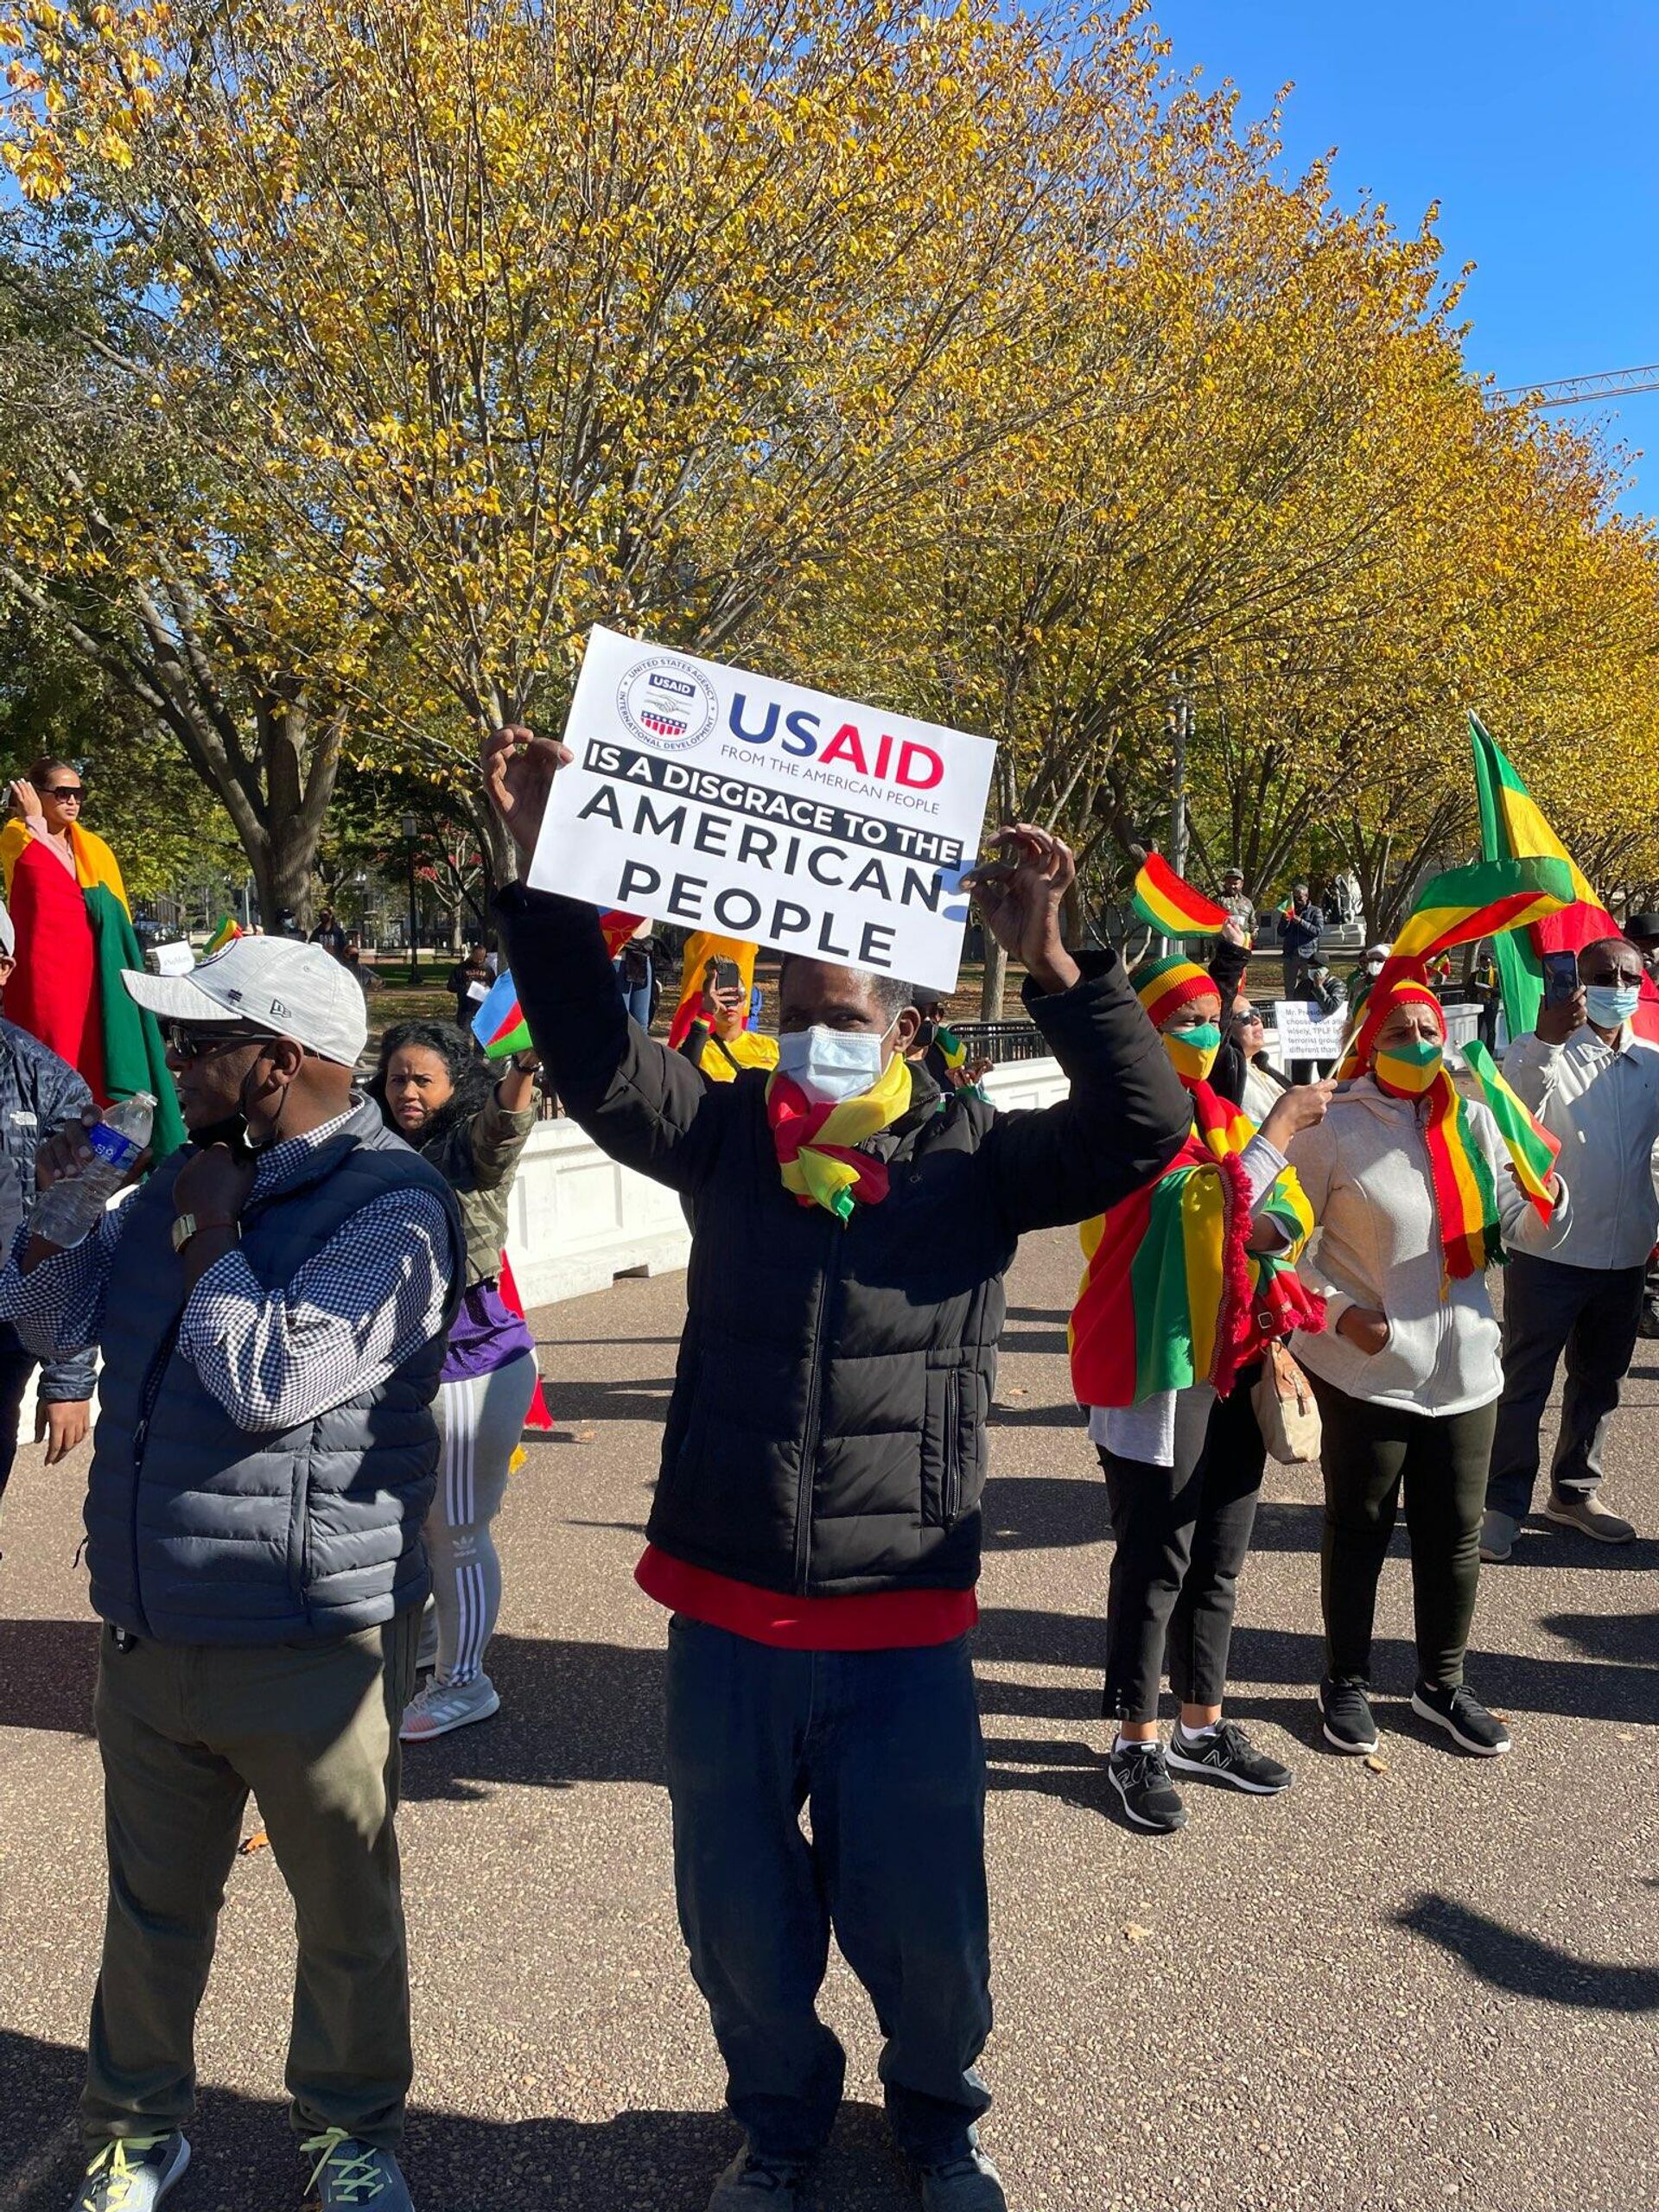 A protester at a pro-Ethiopian government rally outside the White House in Washington, DC, on November 8, 2021, holds a sign saying USAID is a Disgrace to the American People. - Sputnik International, 1920, 22.11.2021